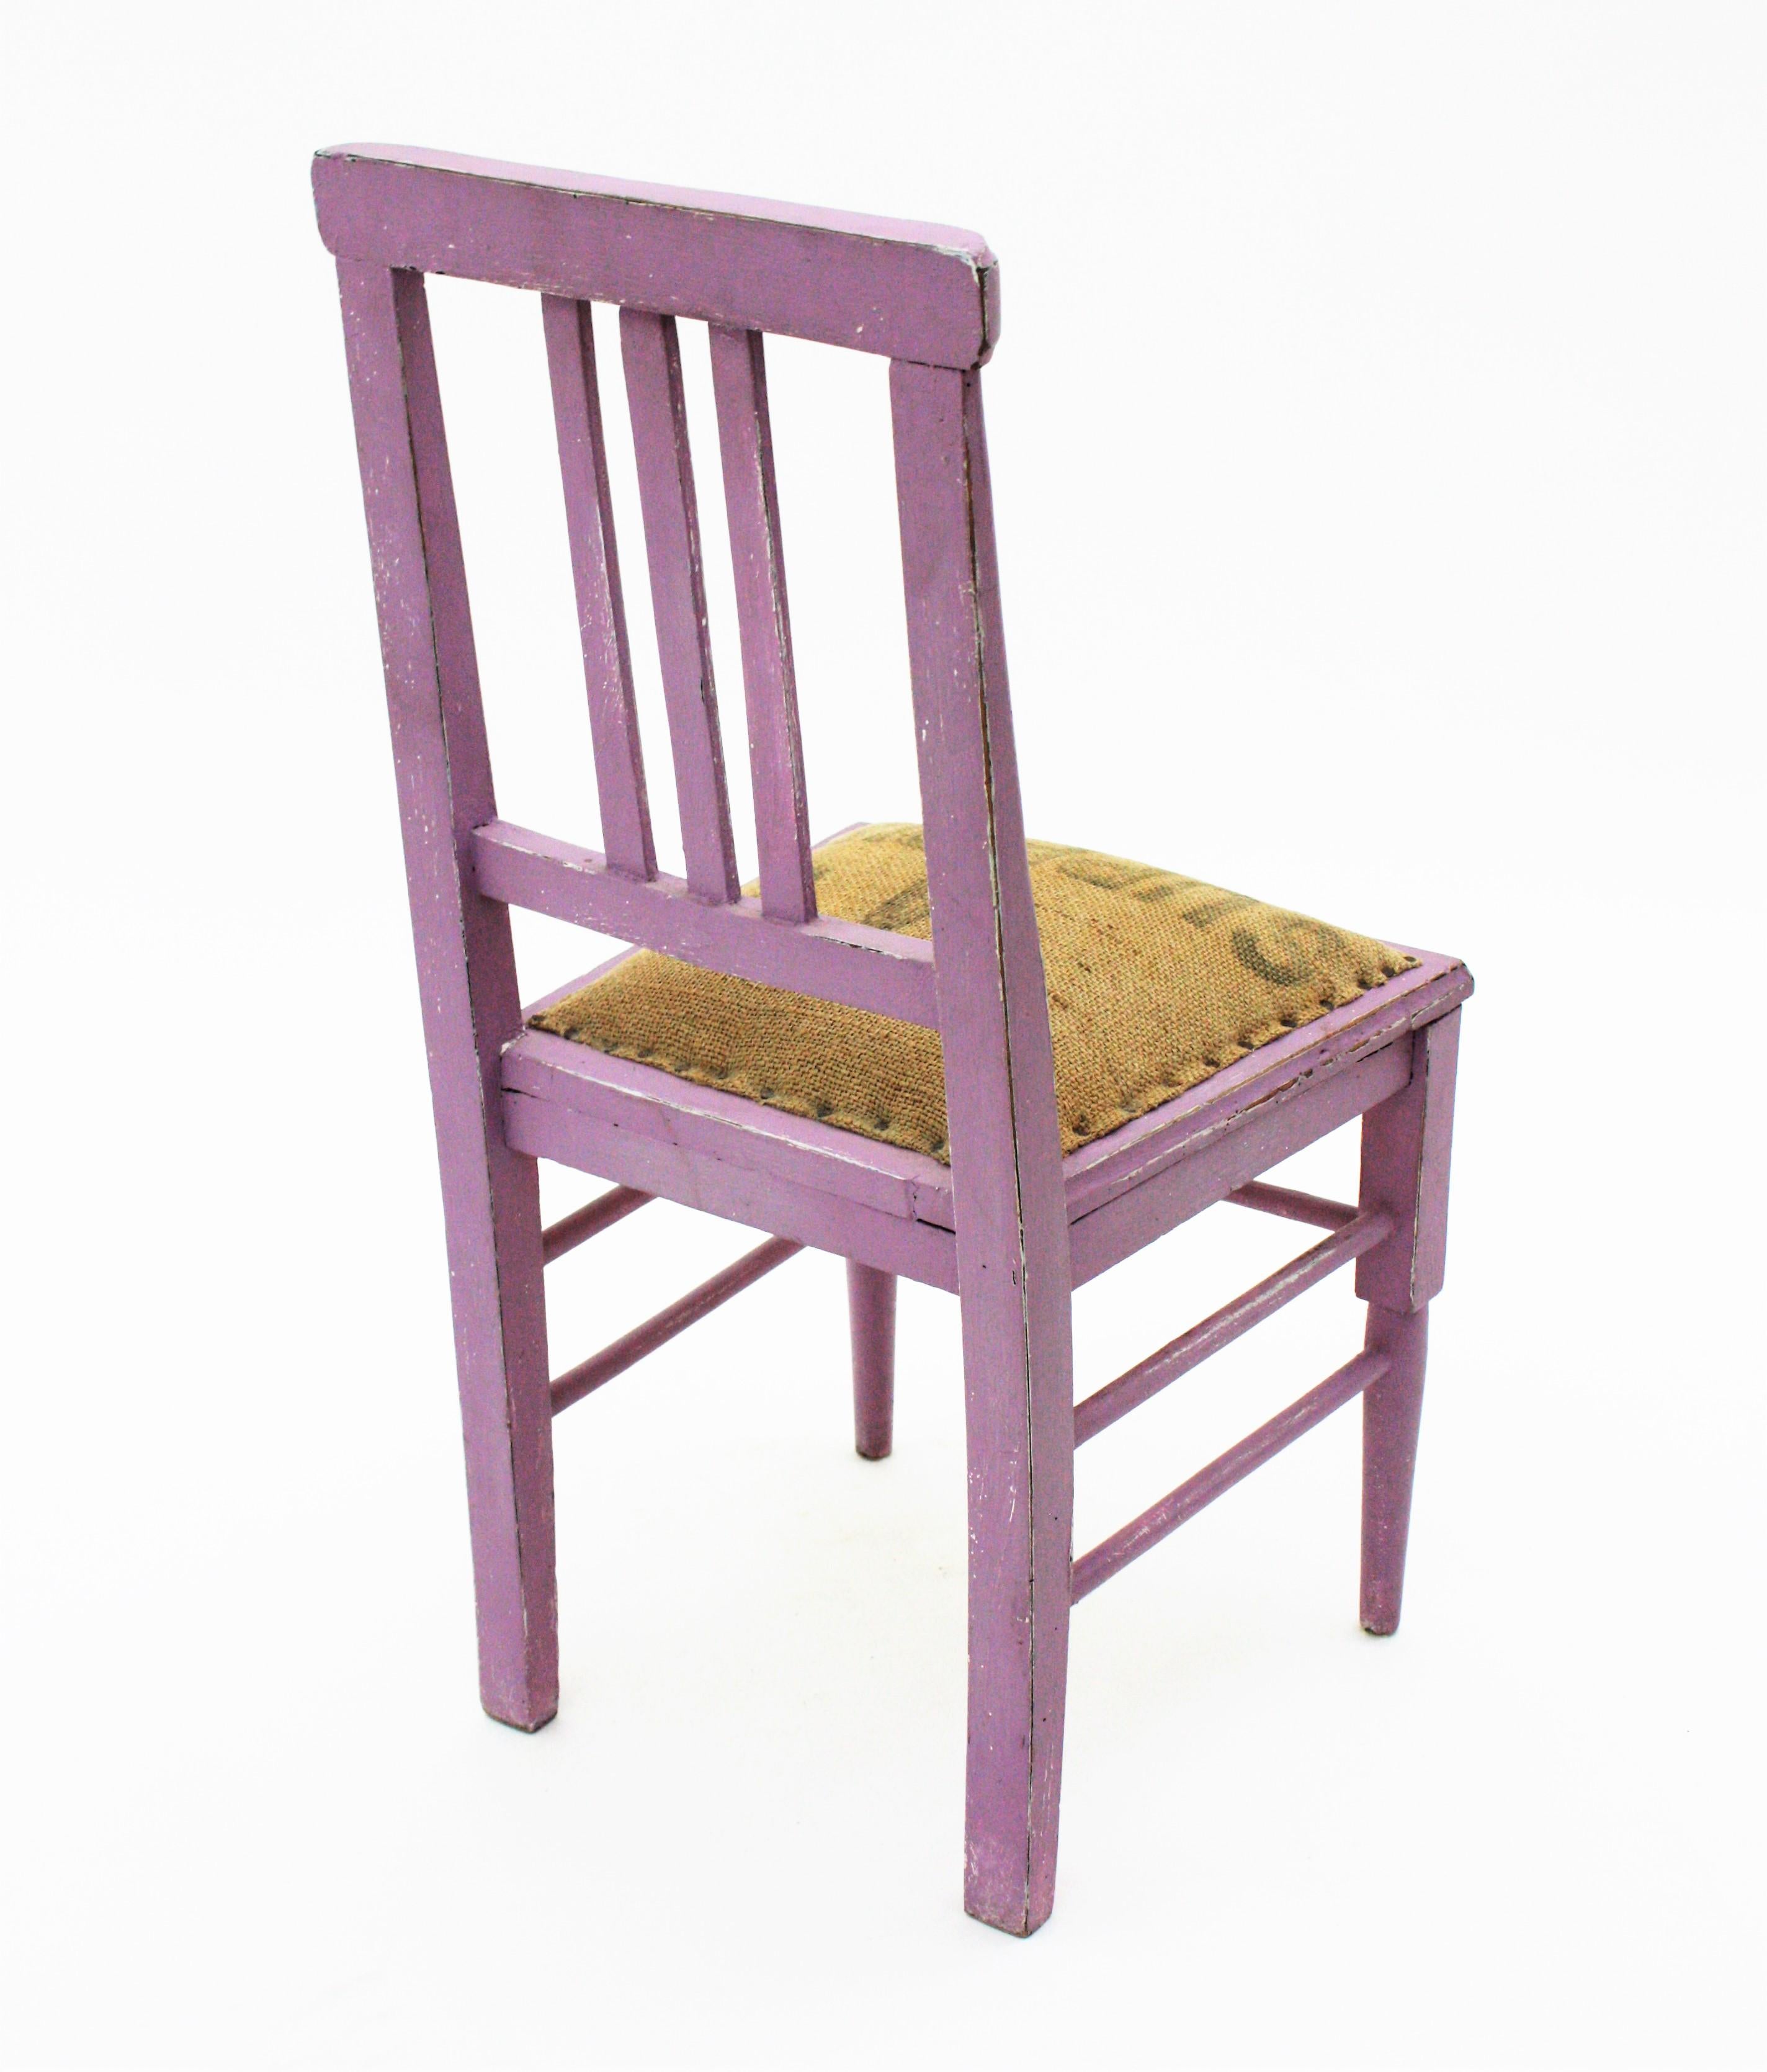 French Provencal Kids Chair in Lavender Patina and Burlap Seat For Sale 4